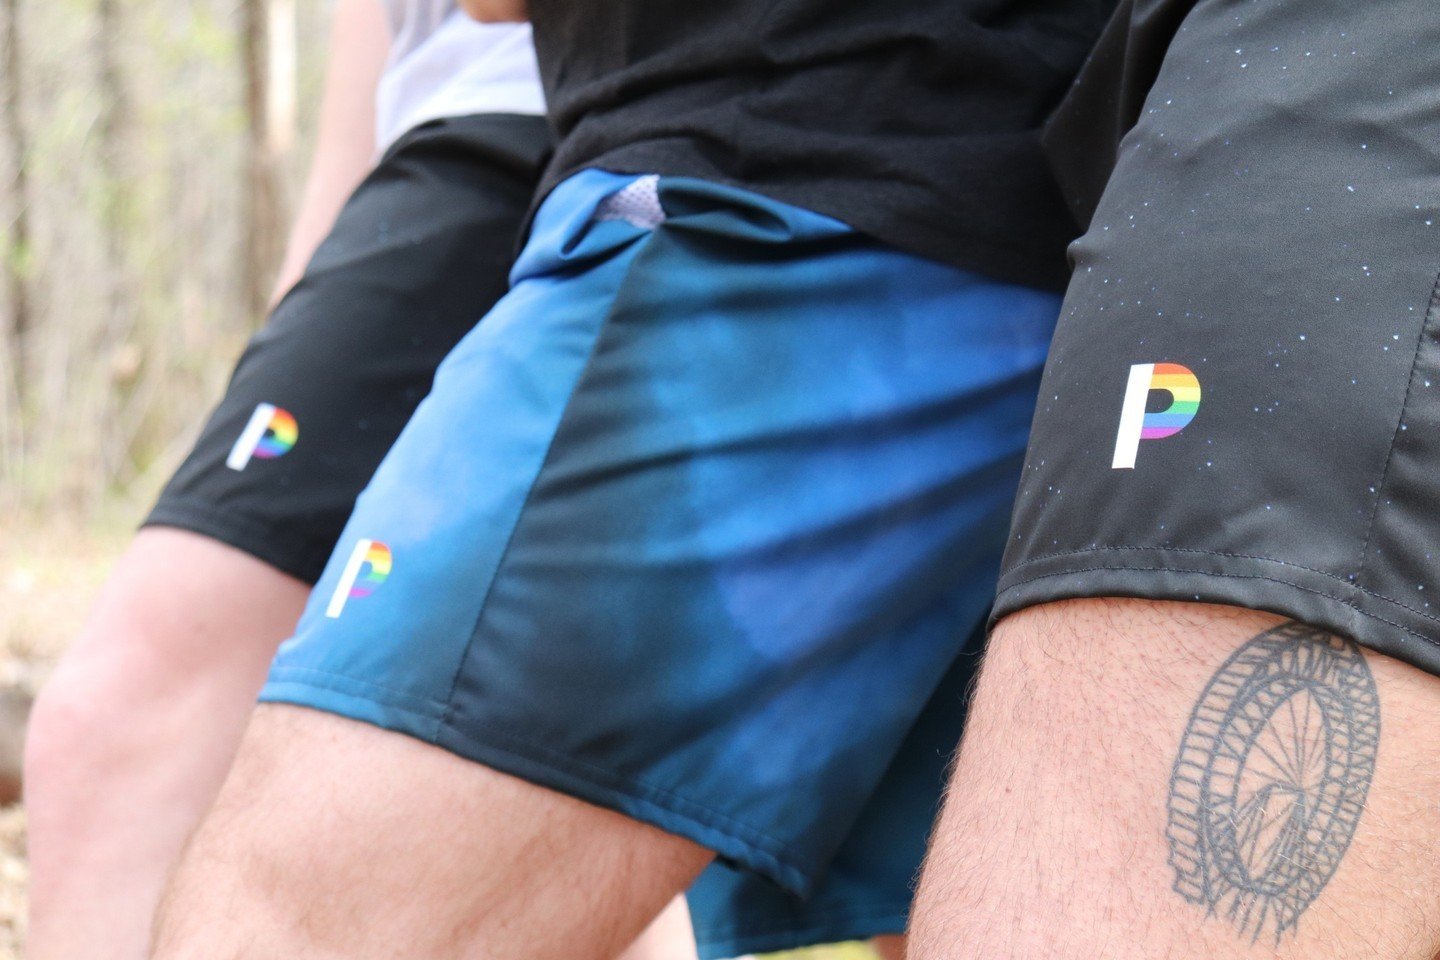 Prideful, passionate, powerful. Rep your pride in style. ⁠
#lgbtq #athleticwear #pride